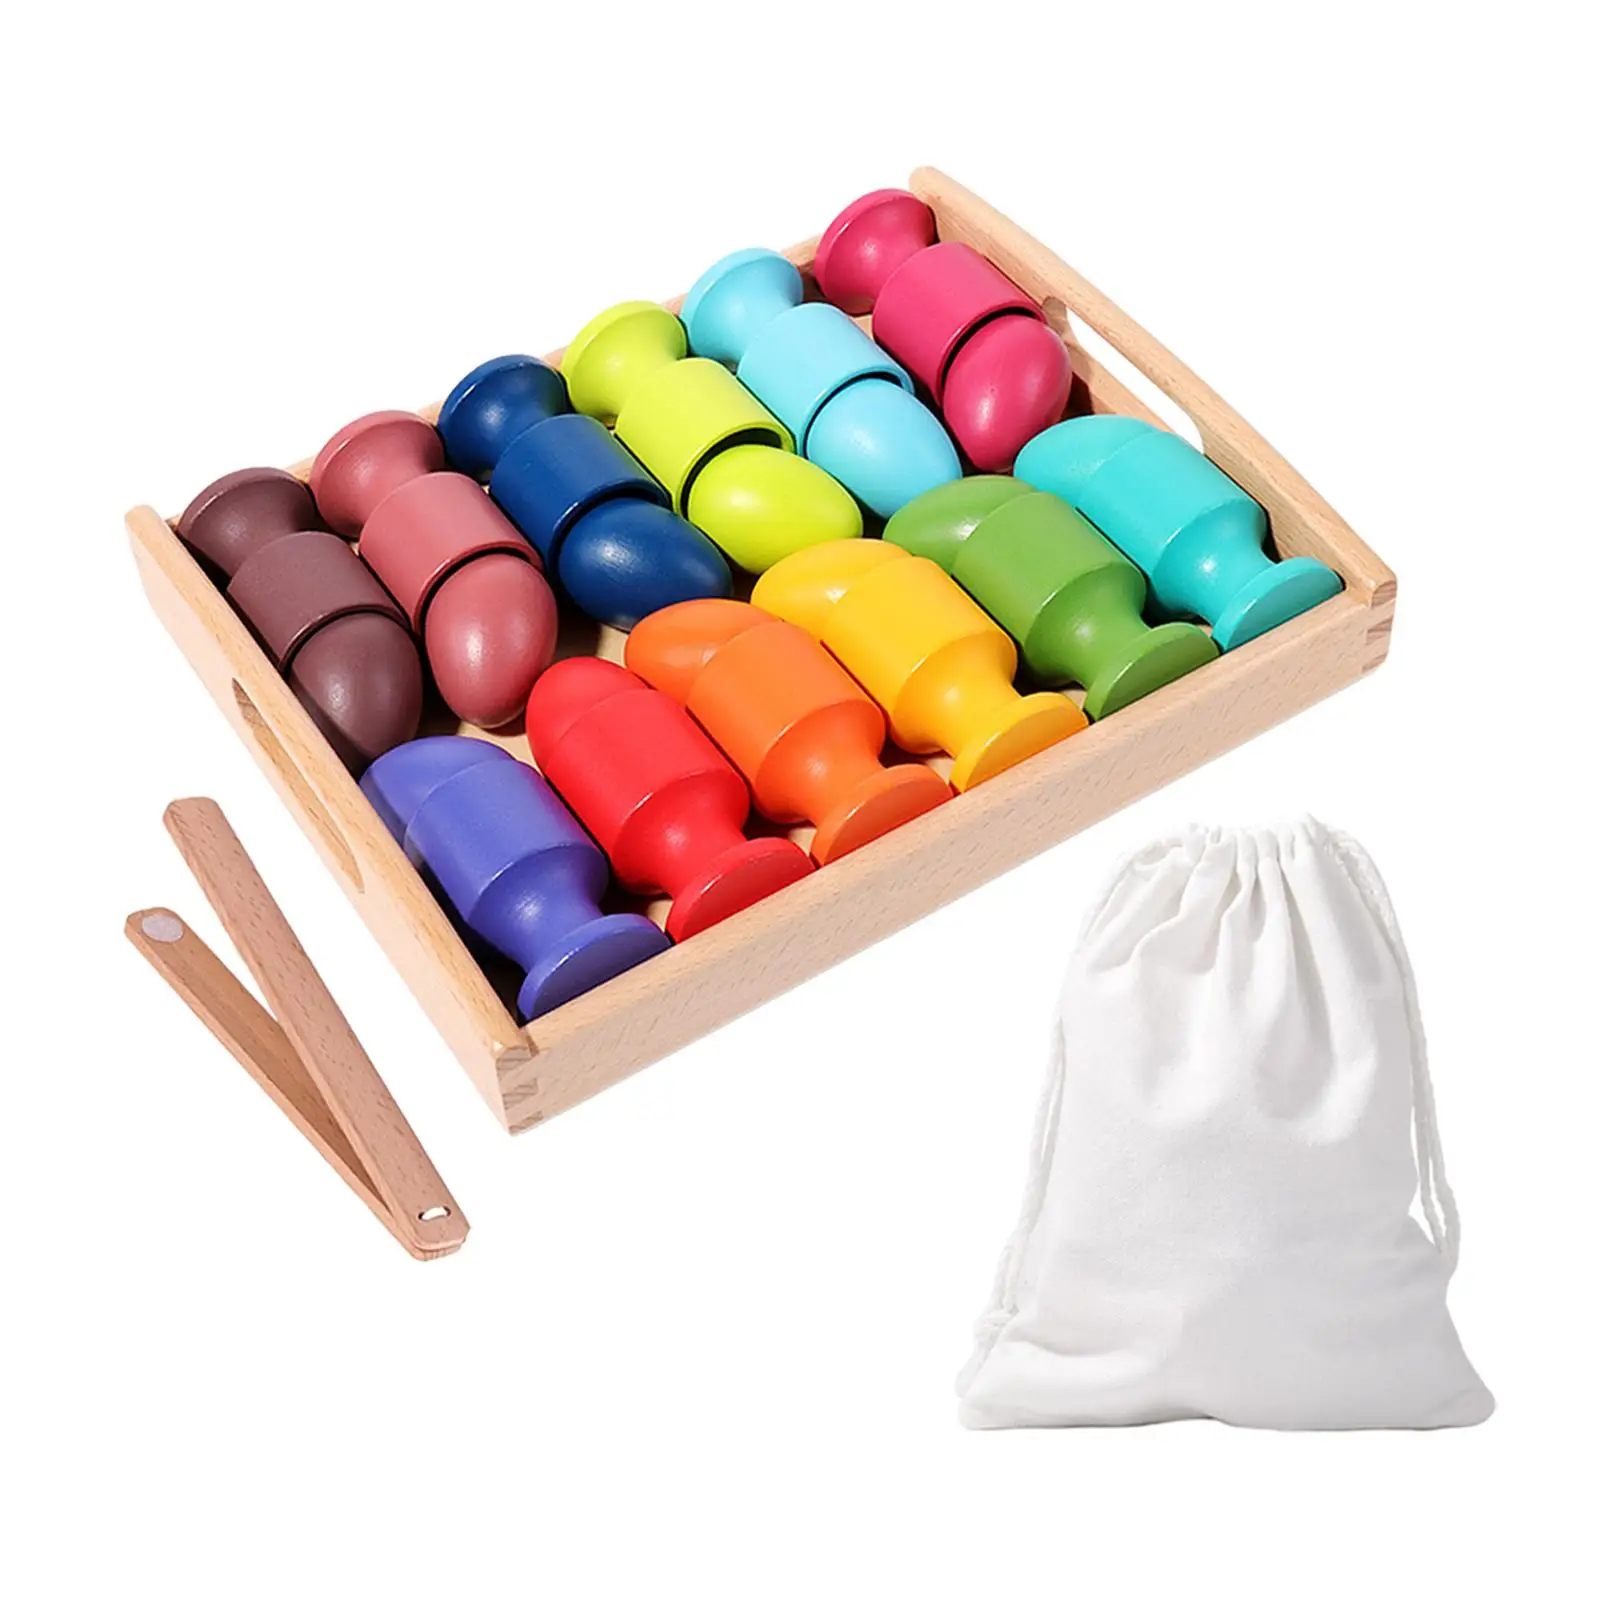 Wooden Sorter Game Rainbow Egg Balls in Cups for Kids Boys Girls Toddlers